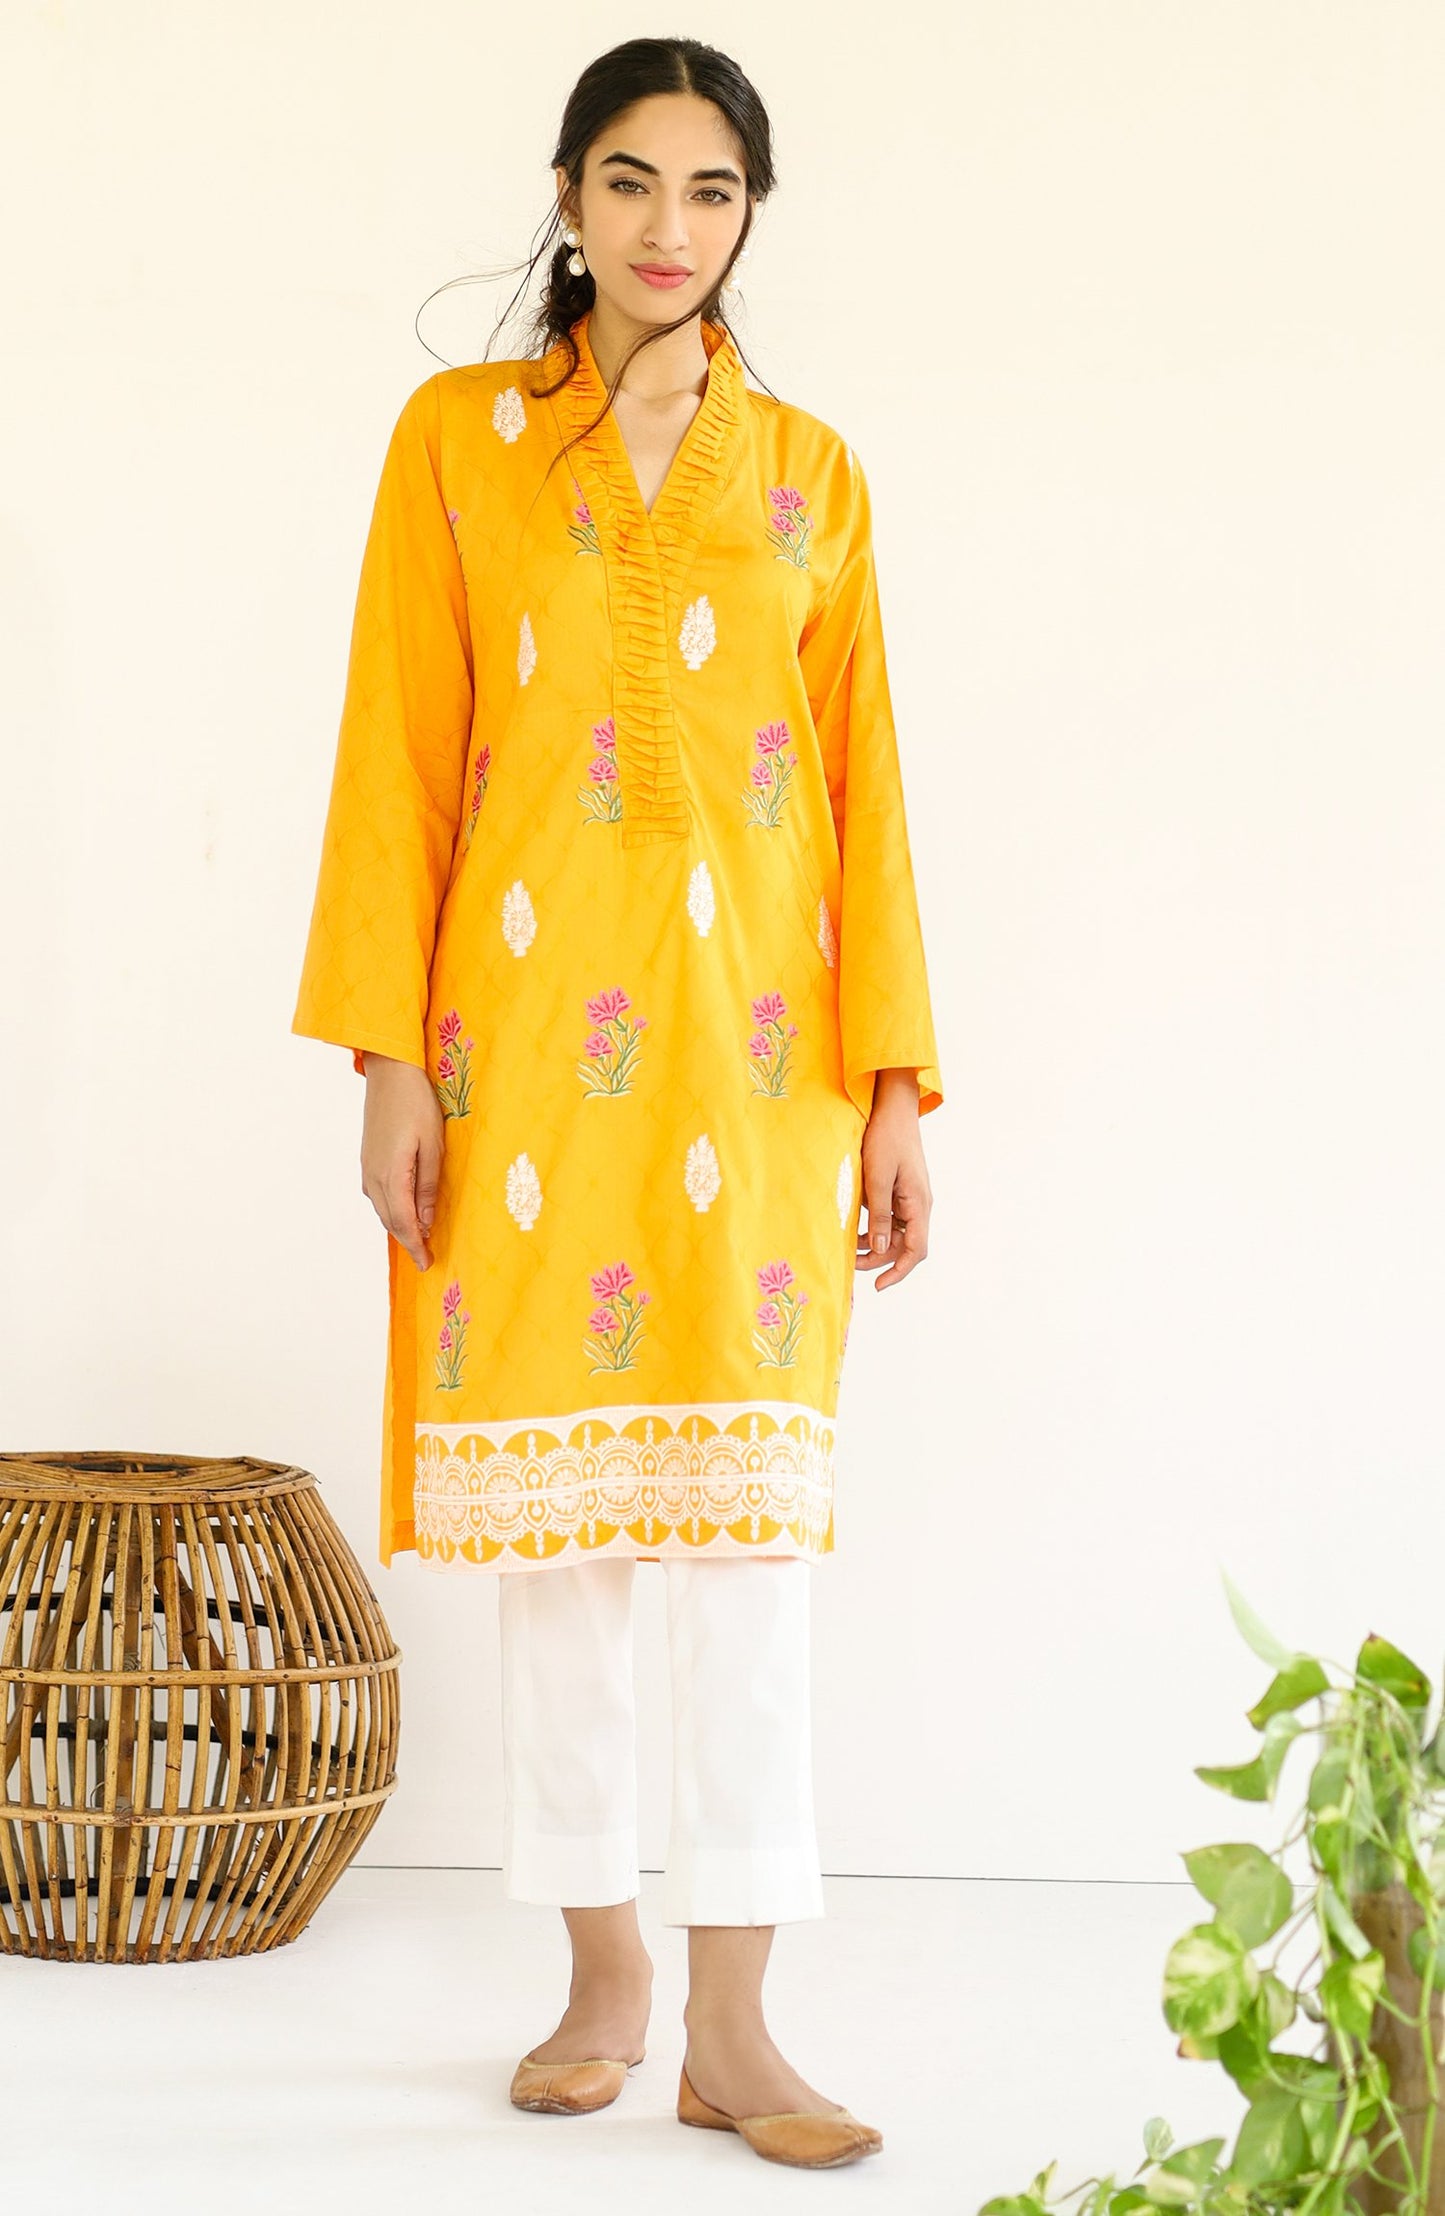 Stitched 1 Piece Embroidered Jacquard Shirt (nrds-149)